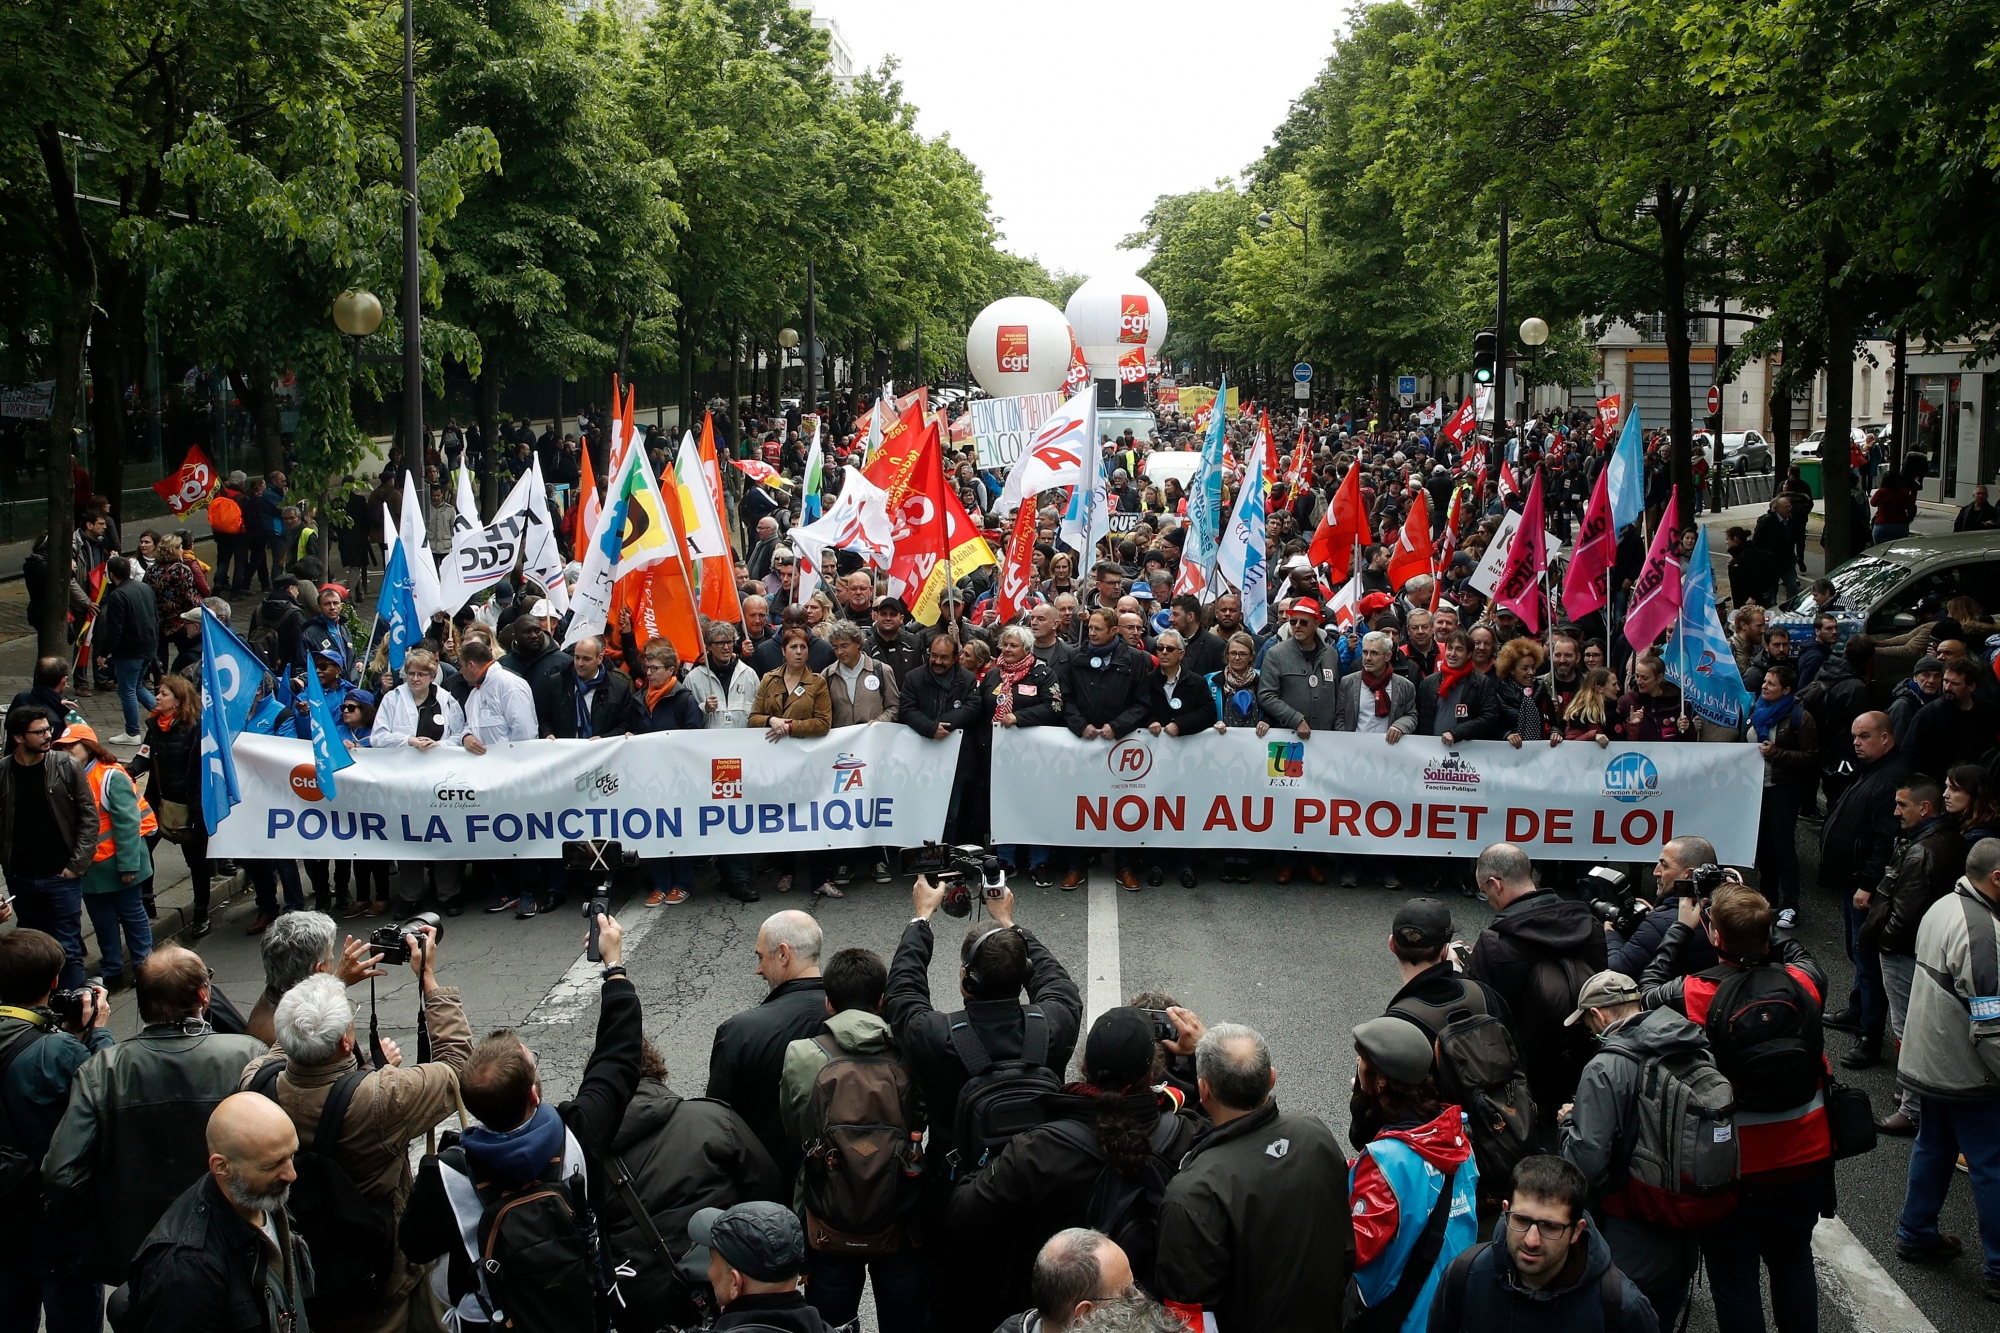 epa07558505 Thousands of protesters and workers from the Public Sector demonstrate in Paris, France, 09 May 2019. French Labor Unions called for a National day of strike against government policies.  EPA/YOAN VALAT FRANCE PUBLIC WORKERS PROTEST